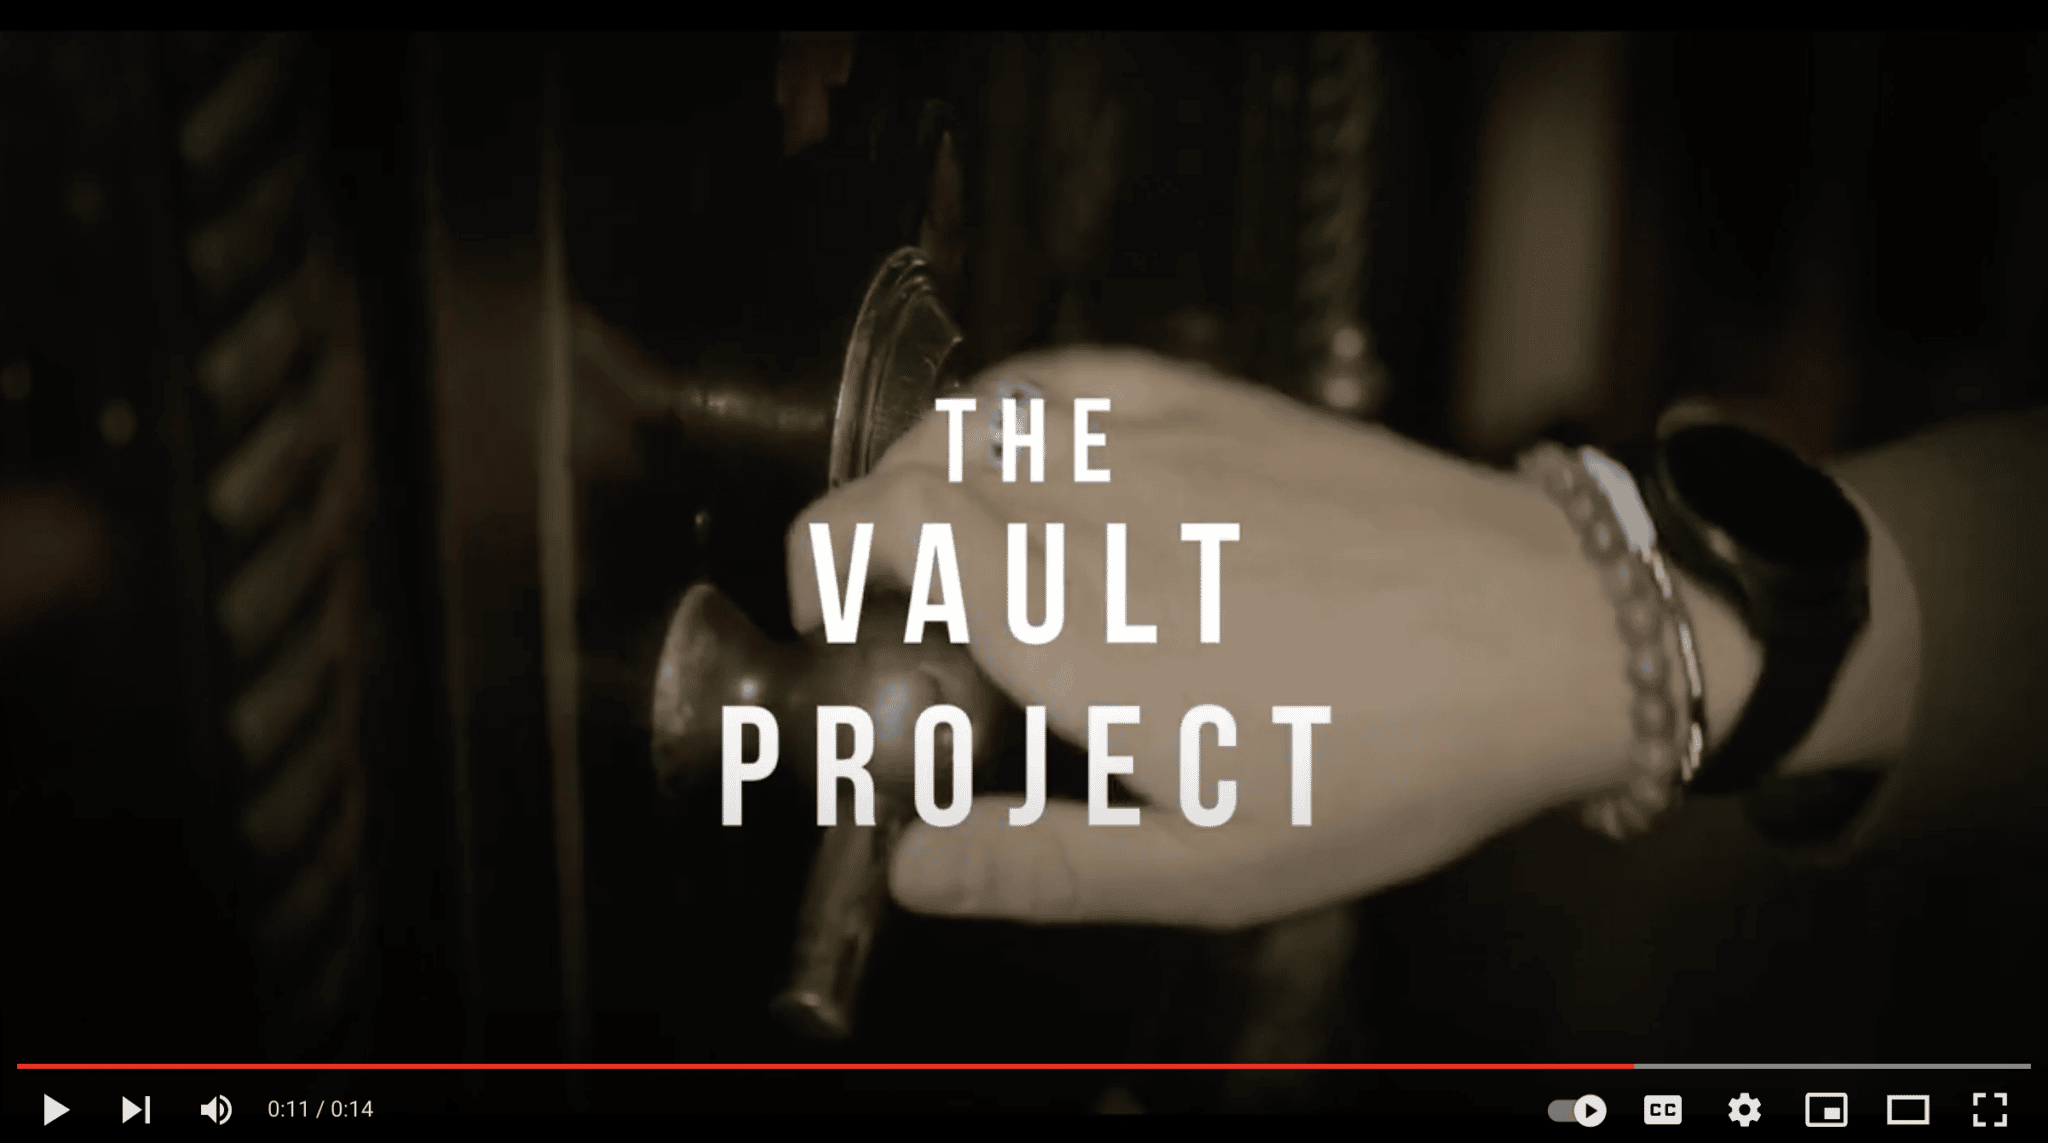 the vault project at jacobs gallery in deadwood